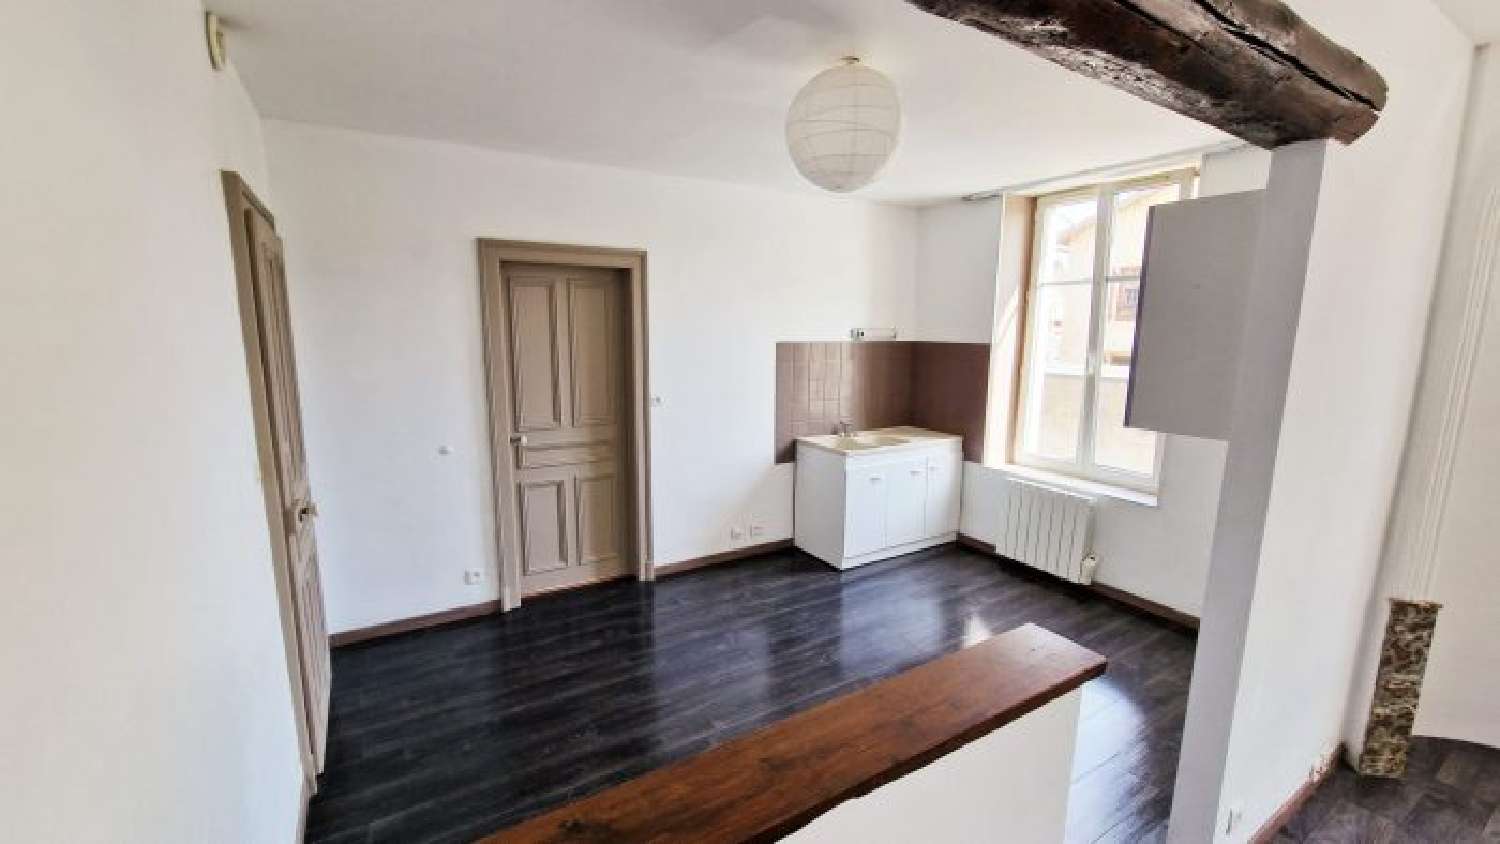  te koop appartement Pagny-sur-Moselle Meurthe-et-Moselle 3